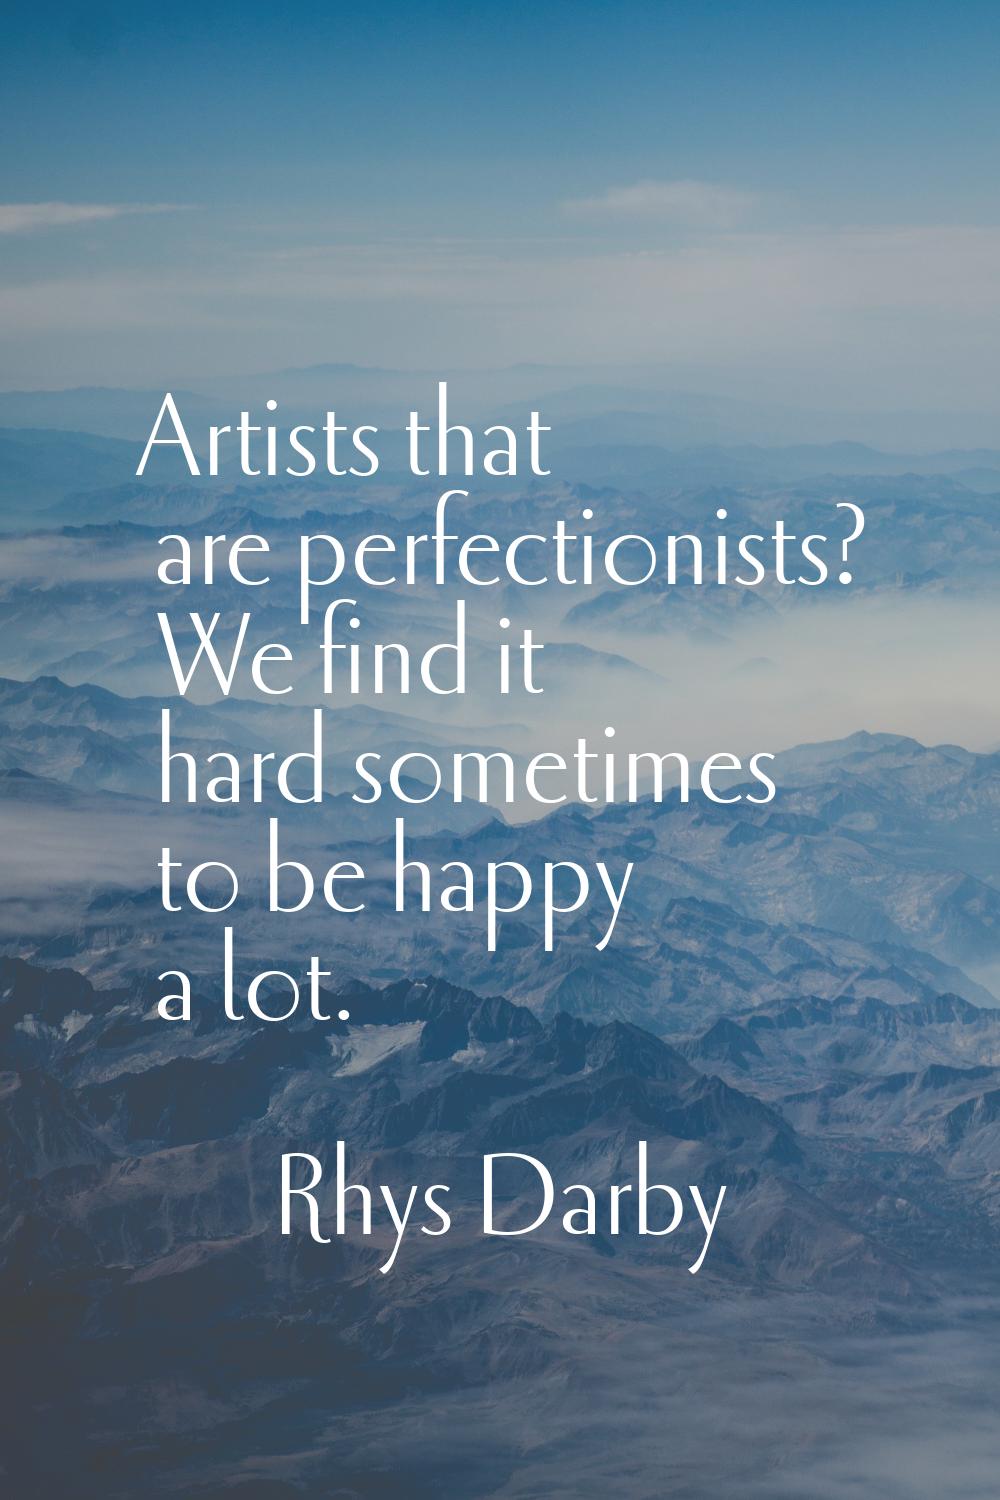 Artists that are perfectionists? We find it hard sometimes to be happy a lot.